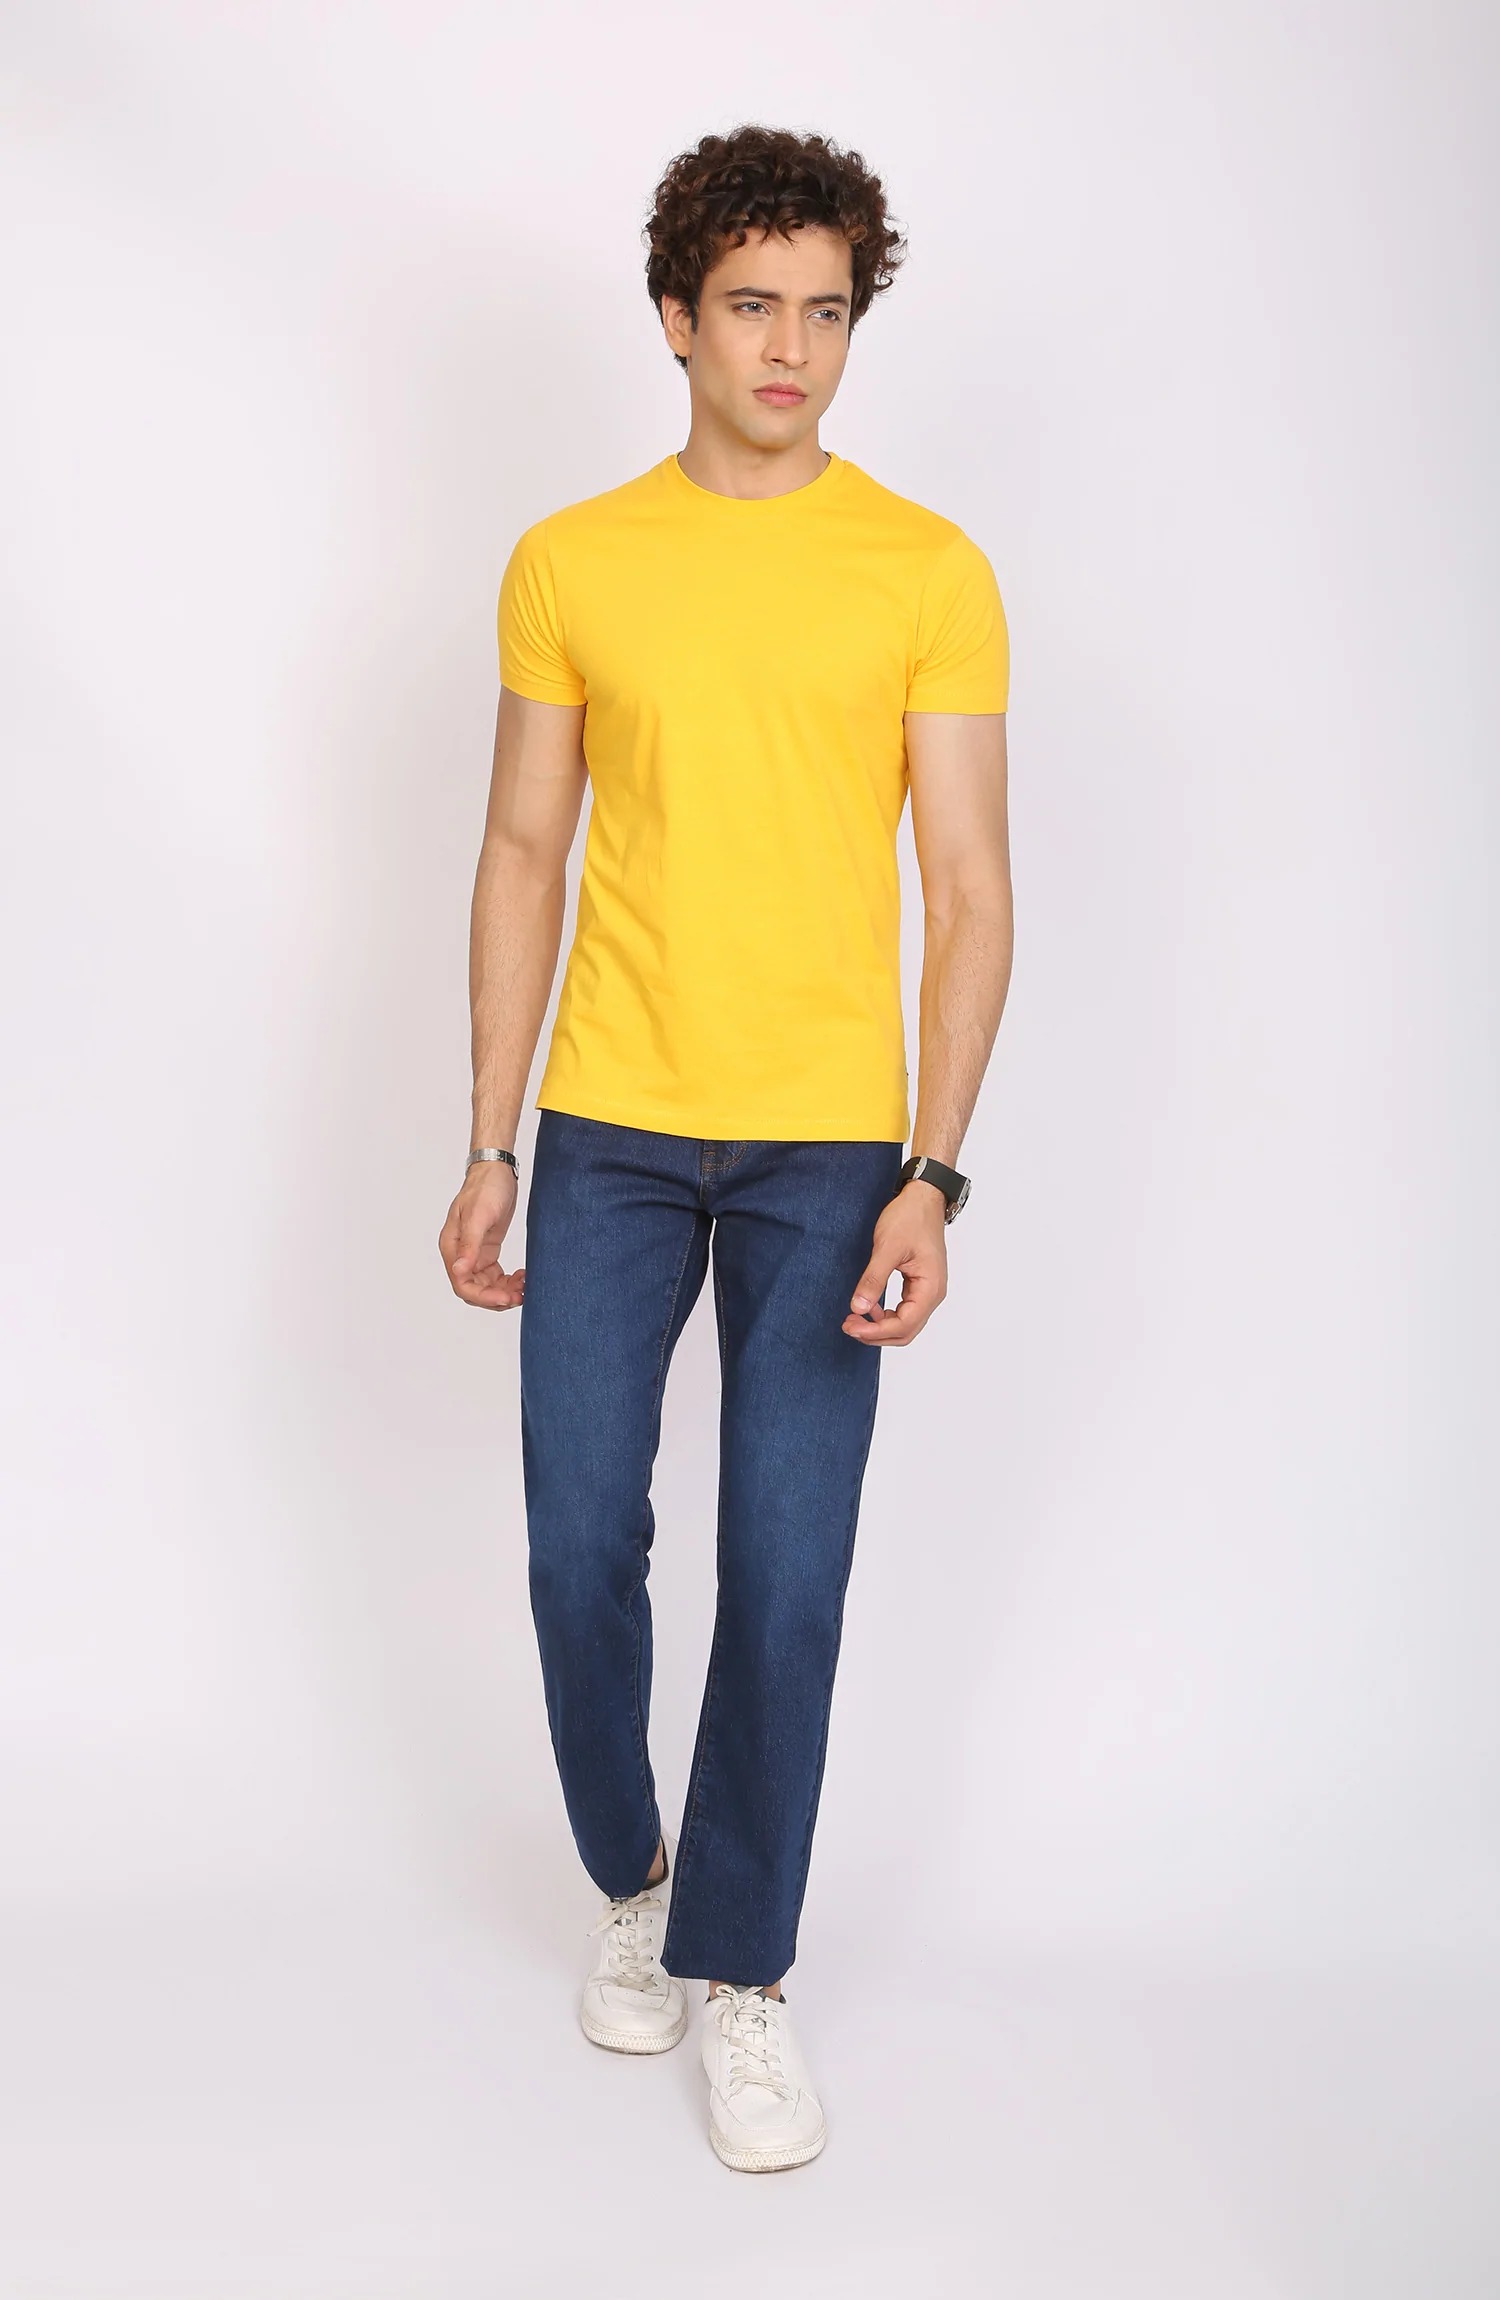 KNIT TEE IN YELLOW
